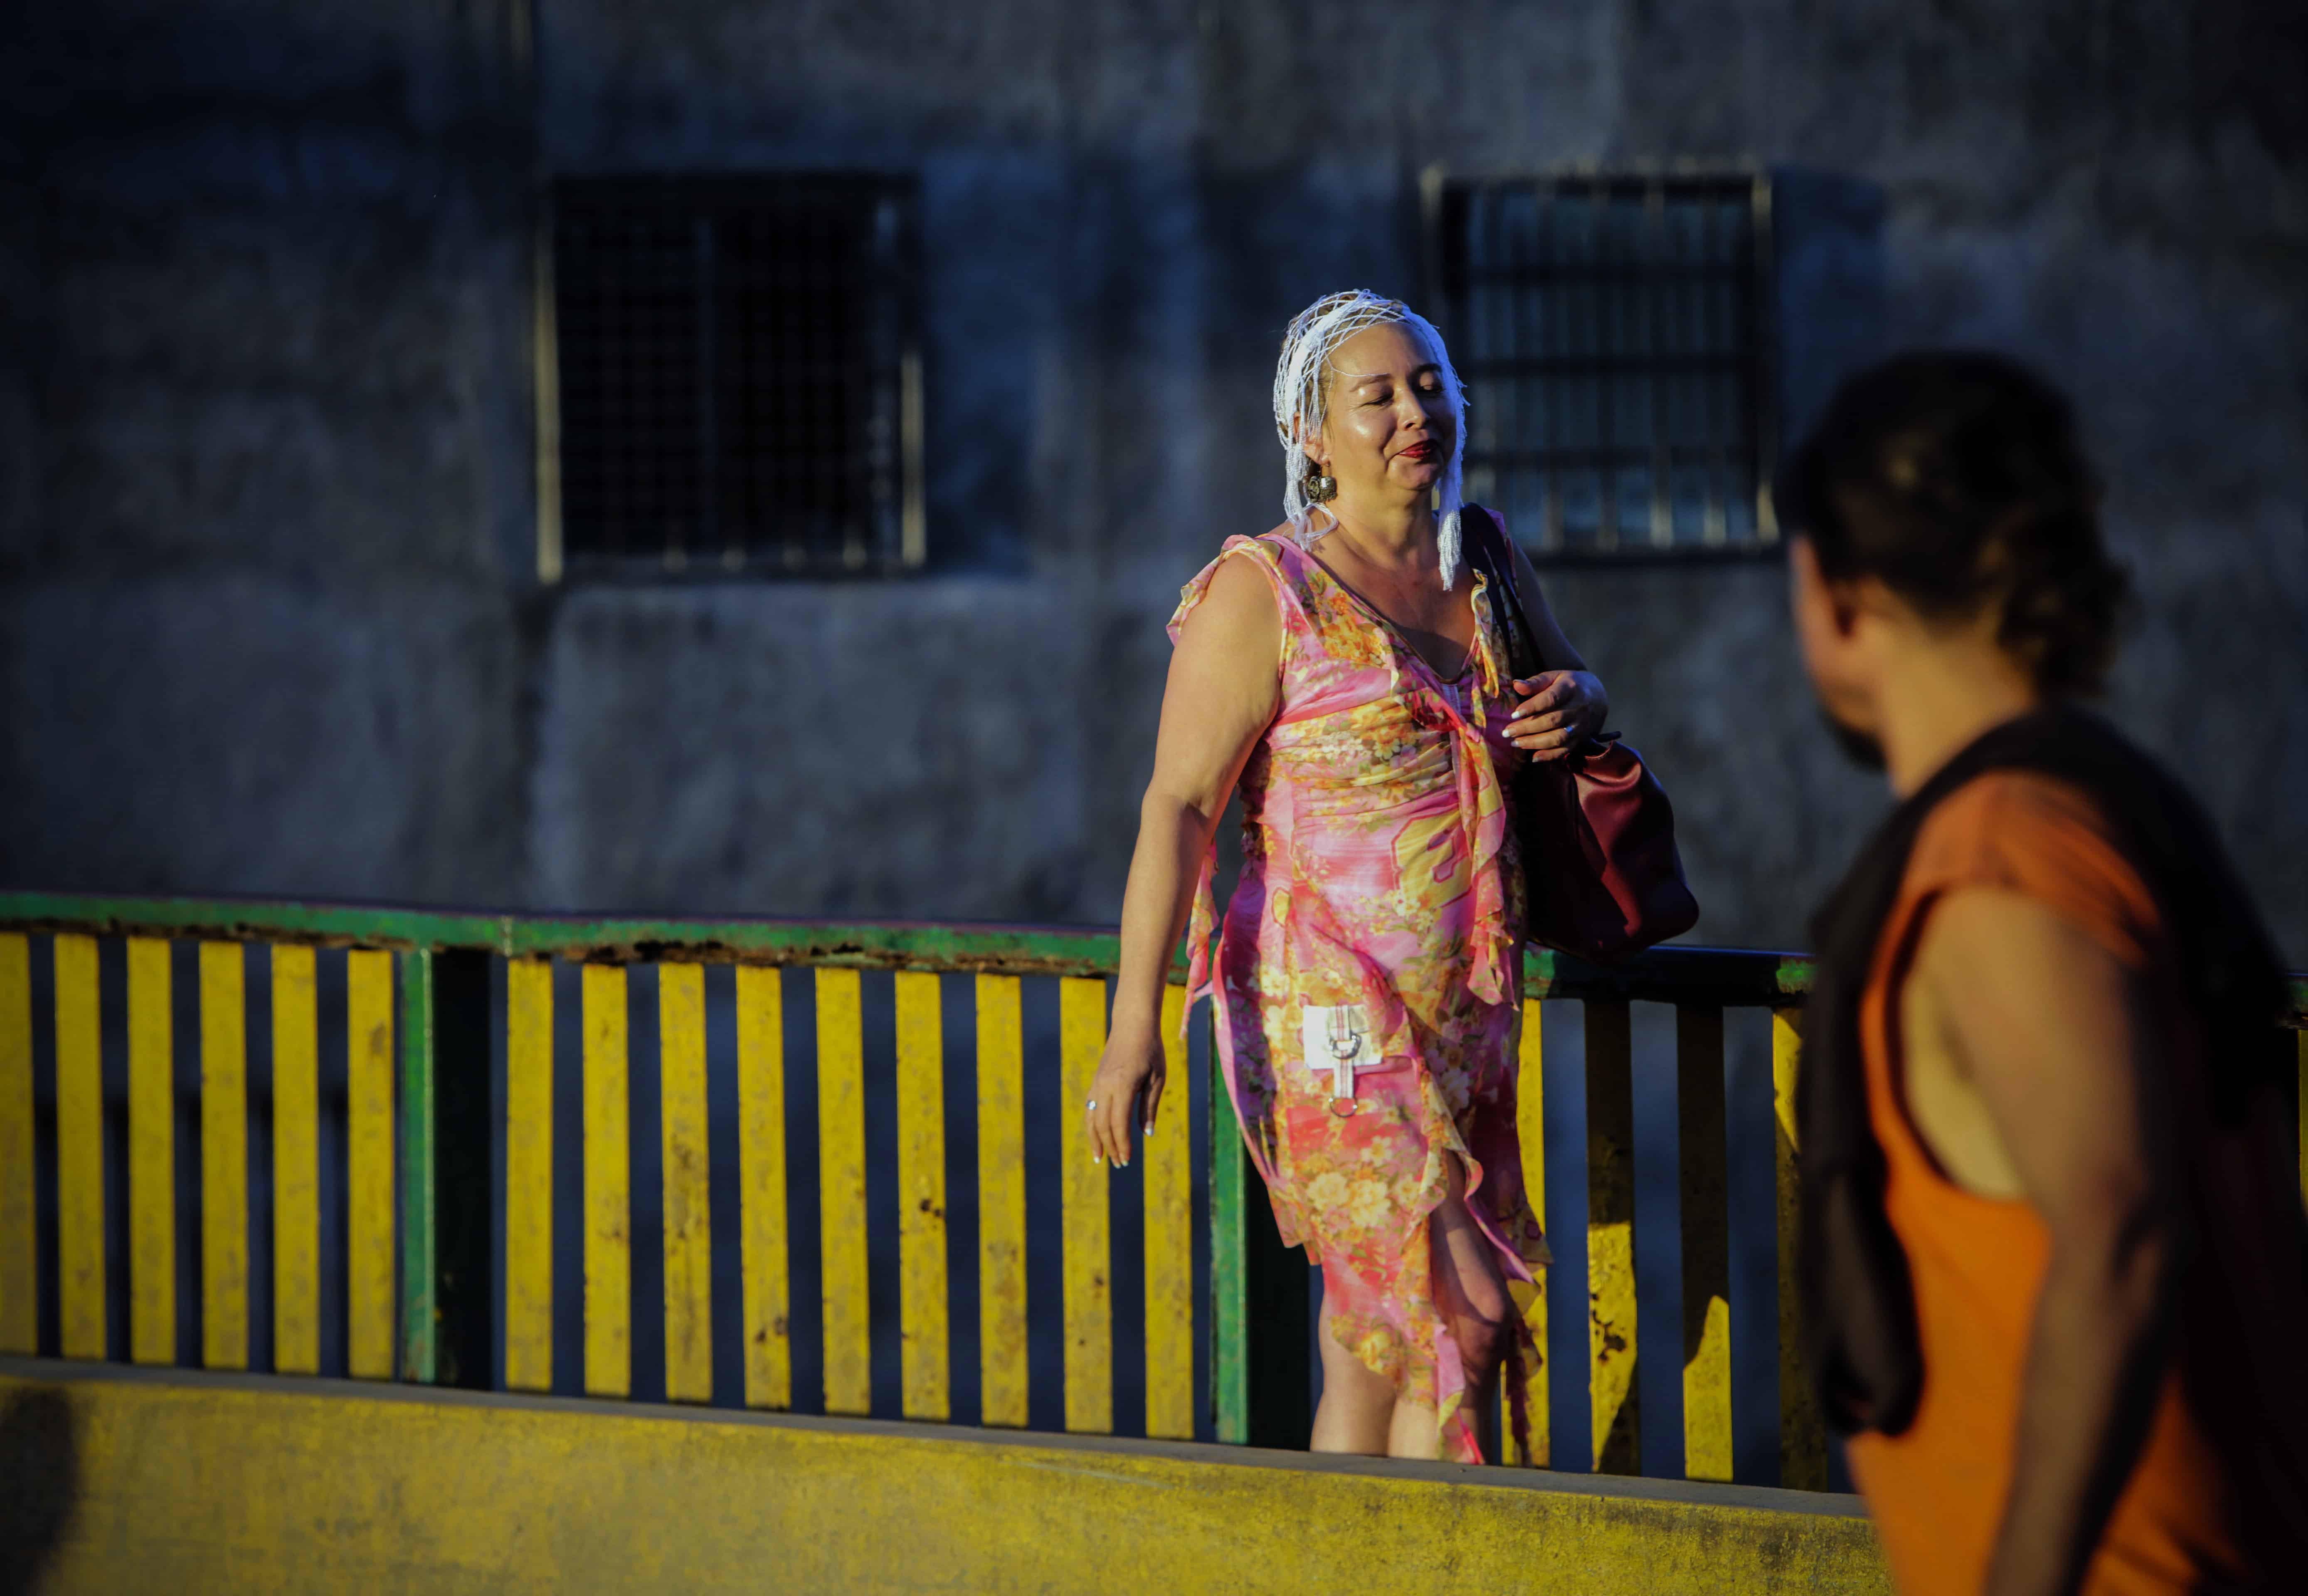 Sex worker Concepcion de Maria Jarquin, 46, waits for clients in Matagalpa's downtown, 125 km from Managua on March 27, 2015. Jarquin and other sex workers applied to the Supreme Judicial Court of Justice to be volunteer court facilitators.